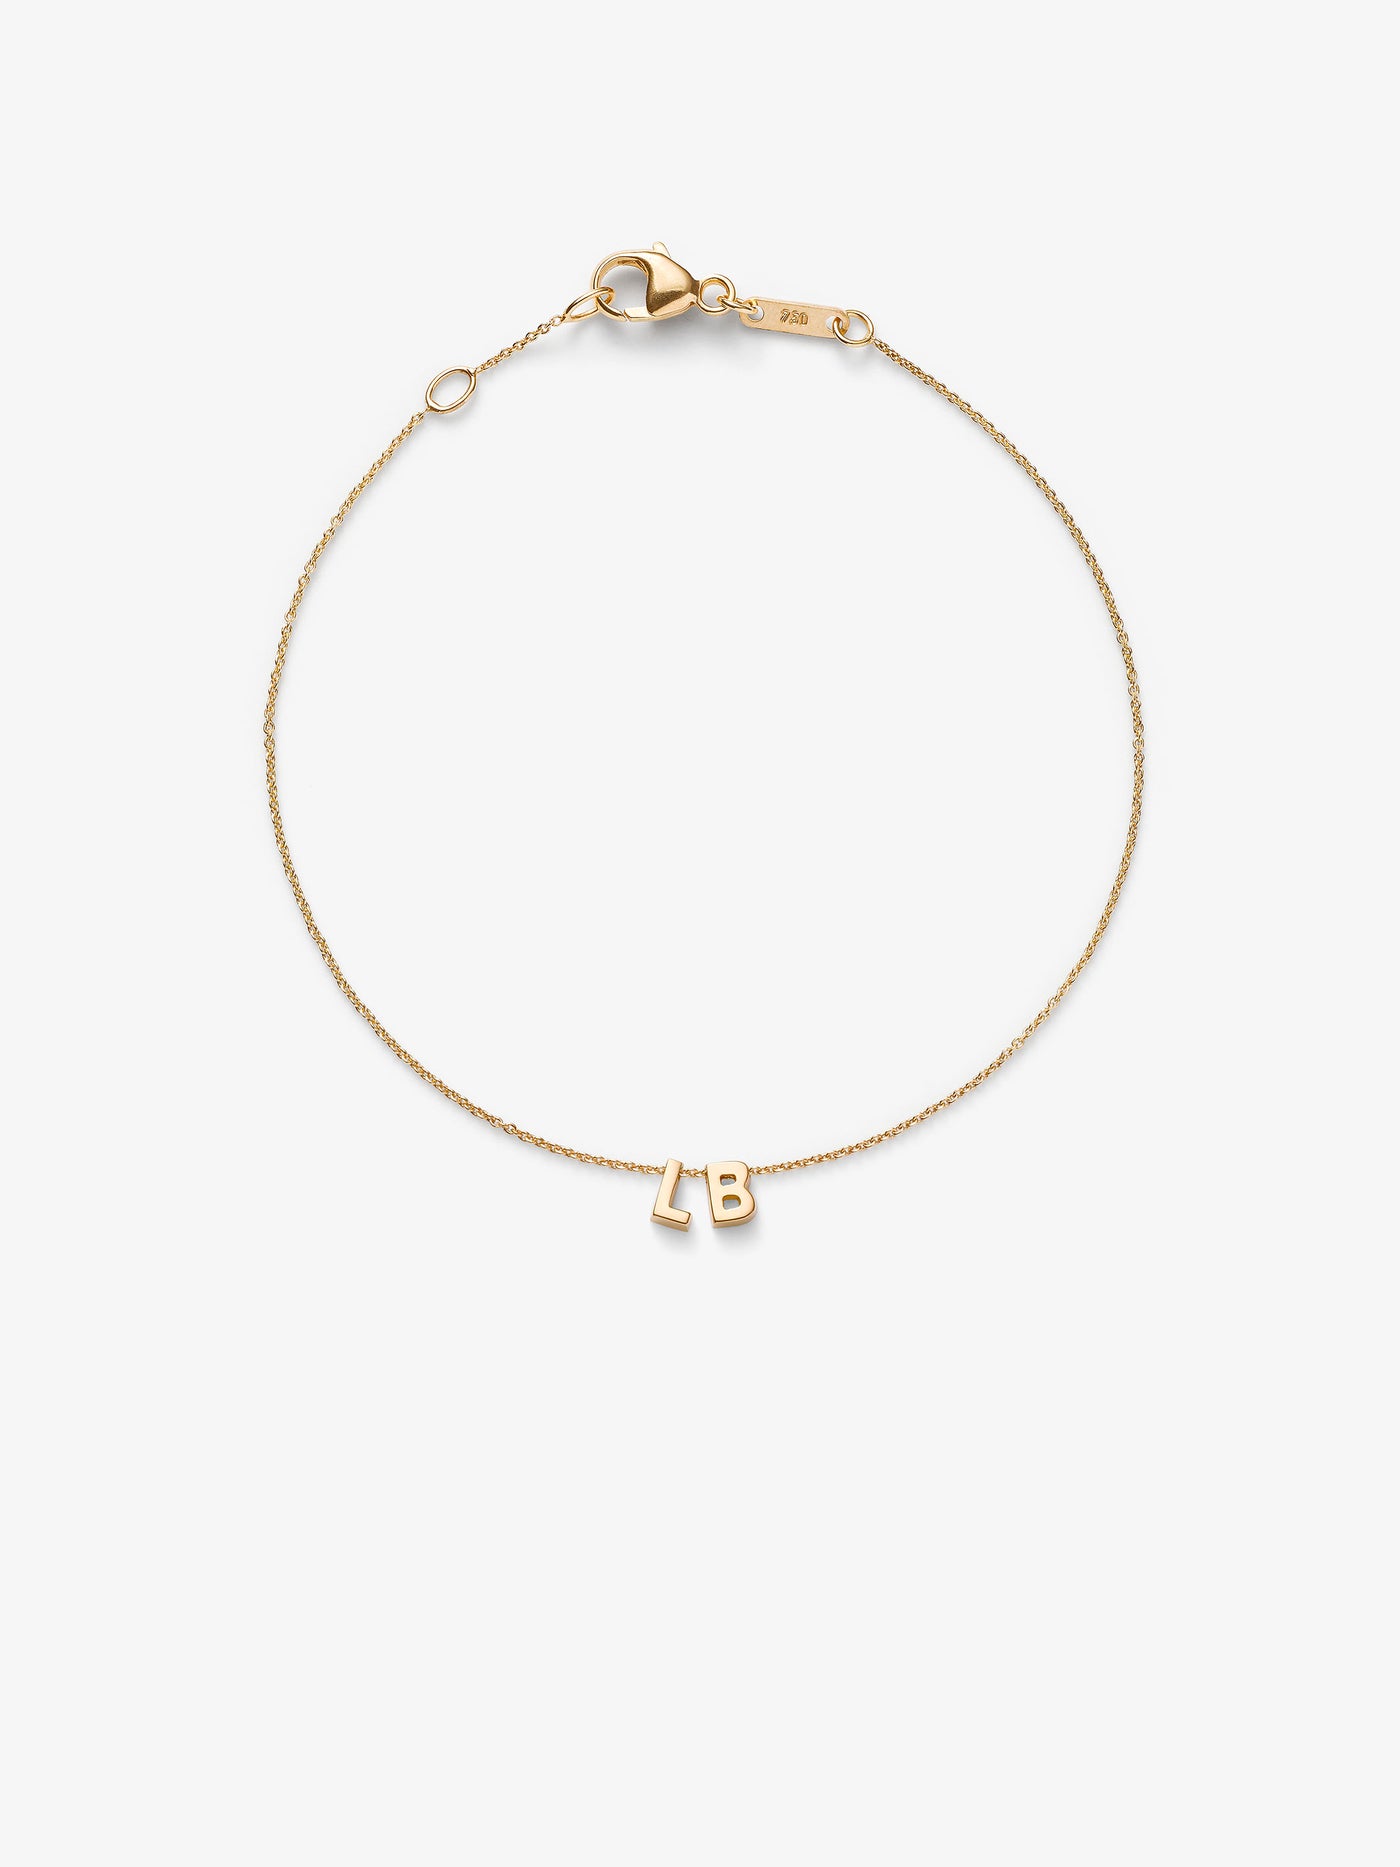  Love Letters Two Letters bracelet with adjustable chain in 18k solid gold